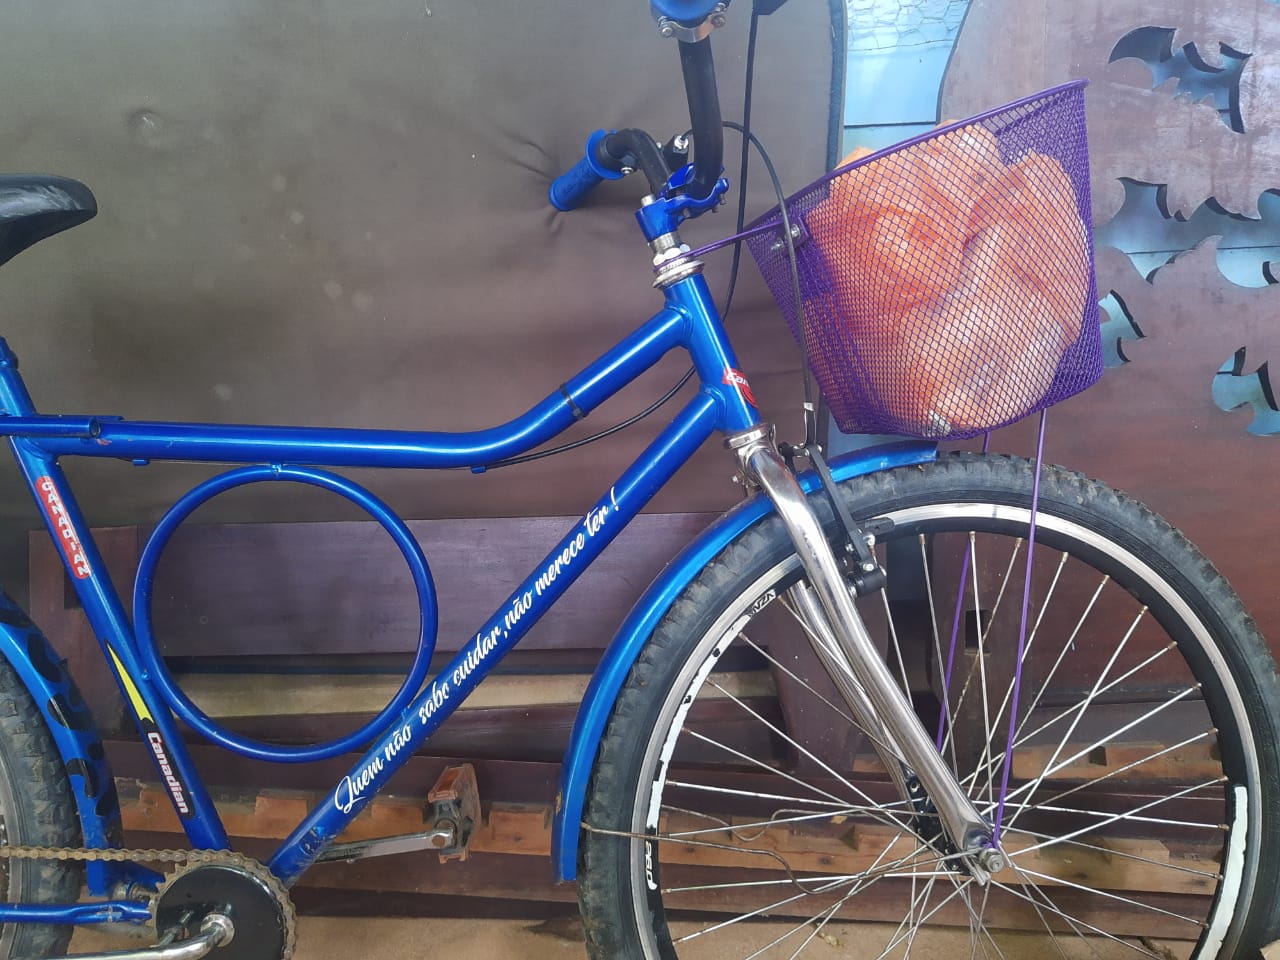 A blue bicycle with a baket that holds a pink plastic bag